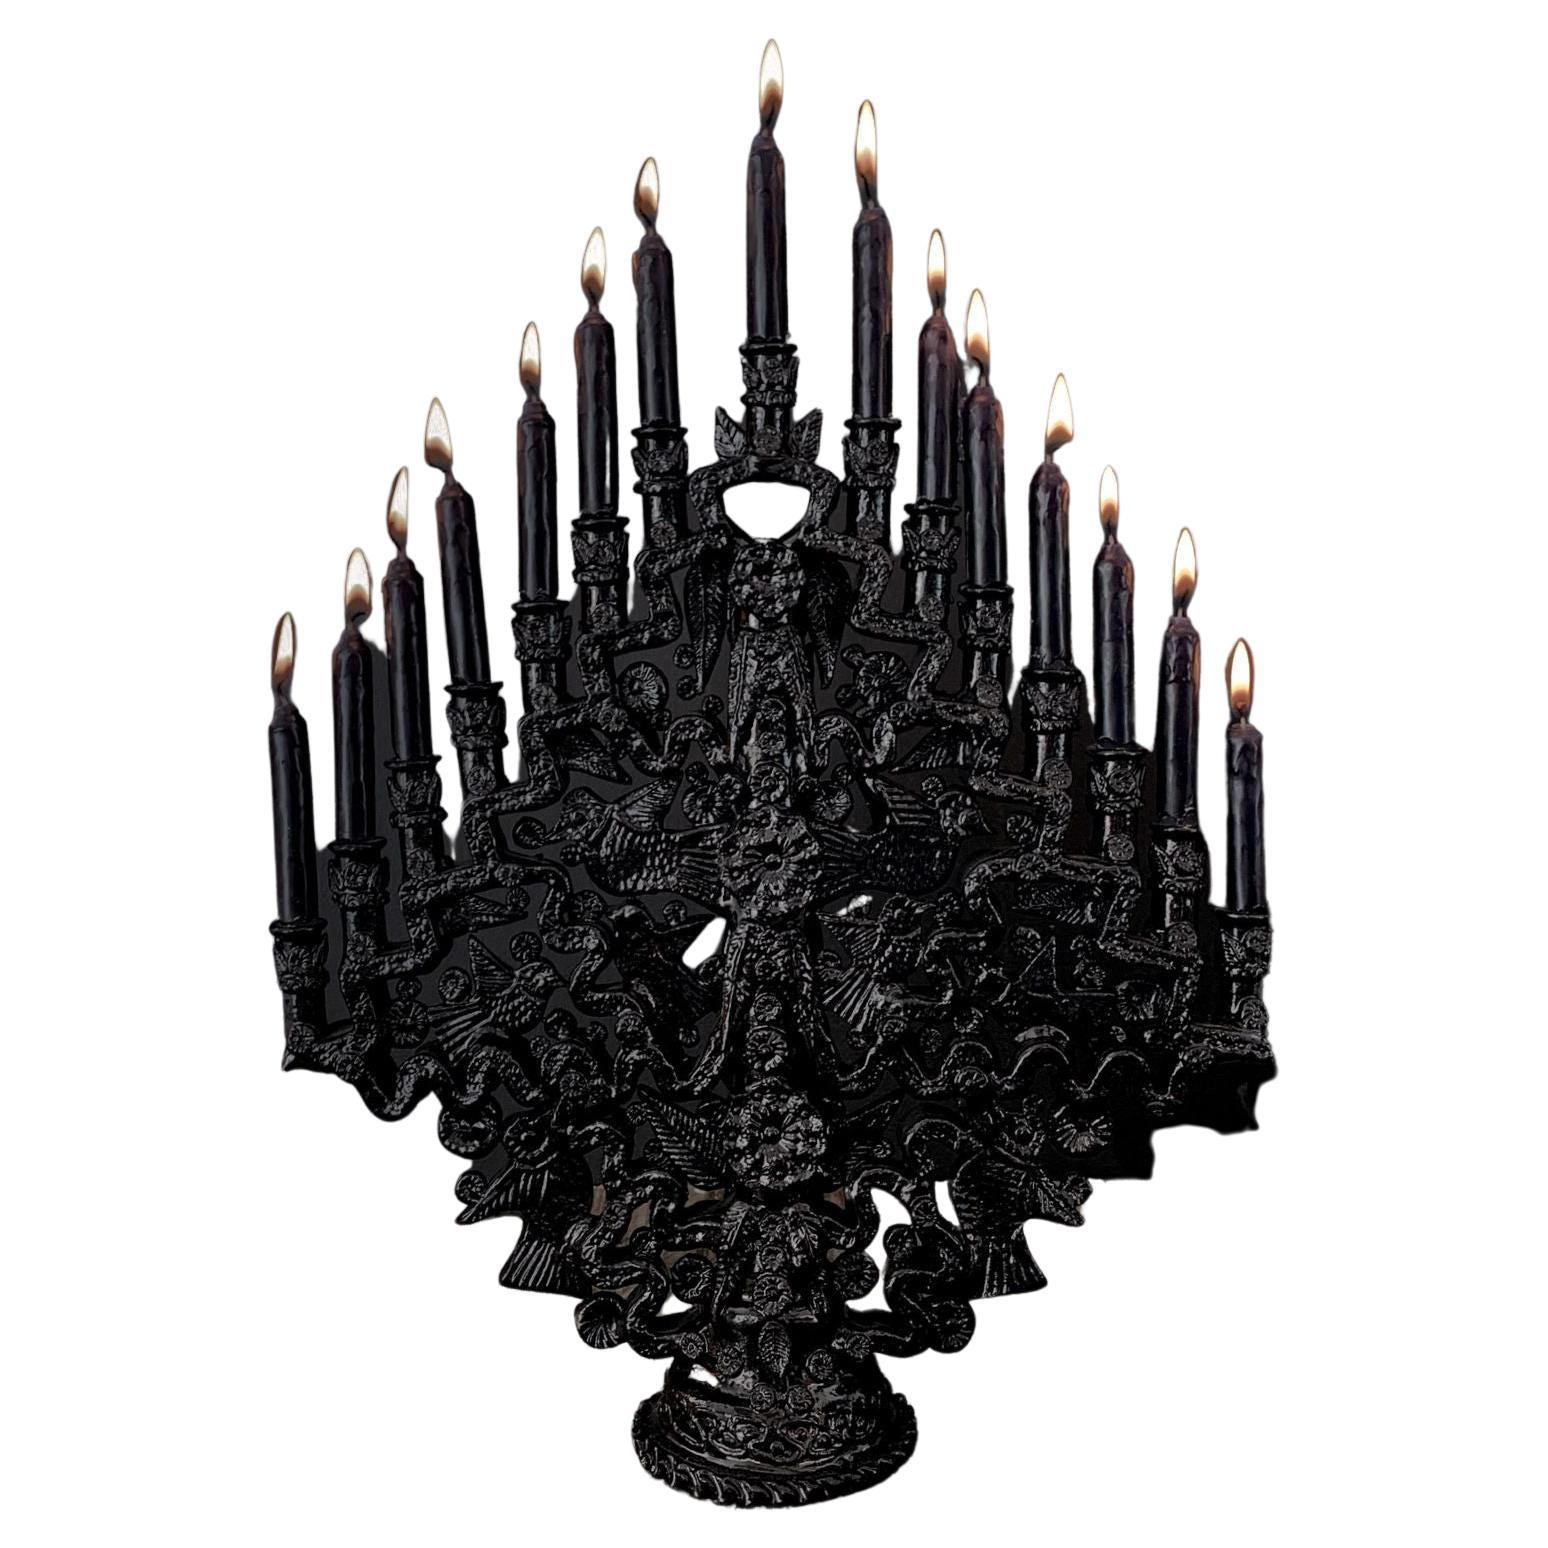 Santa Fe Candleholder by Onora